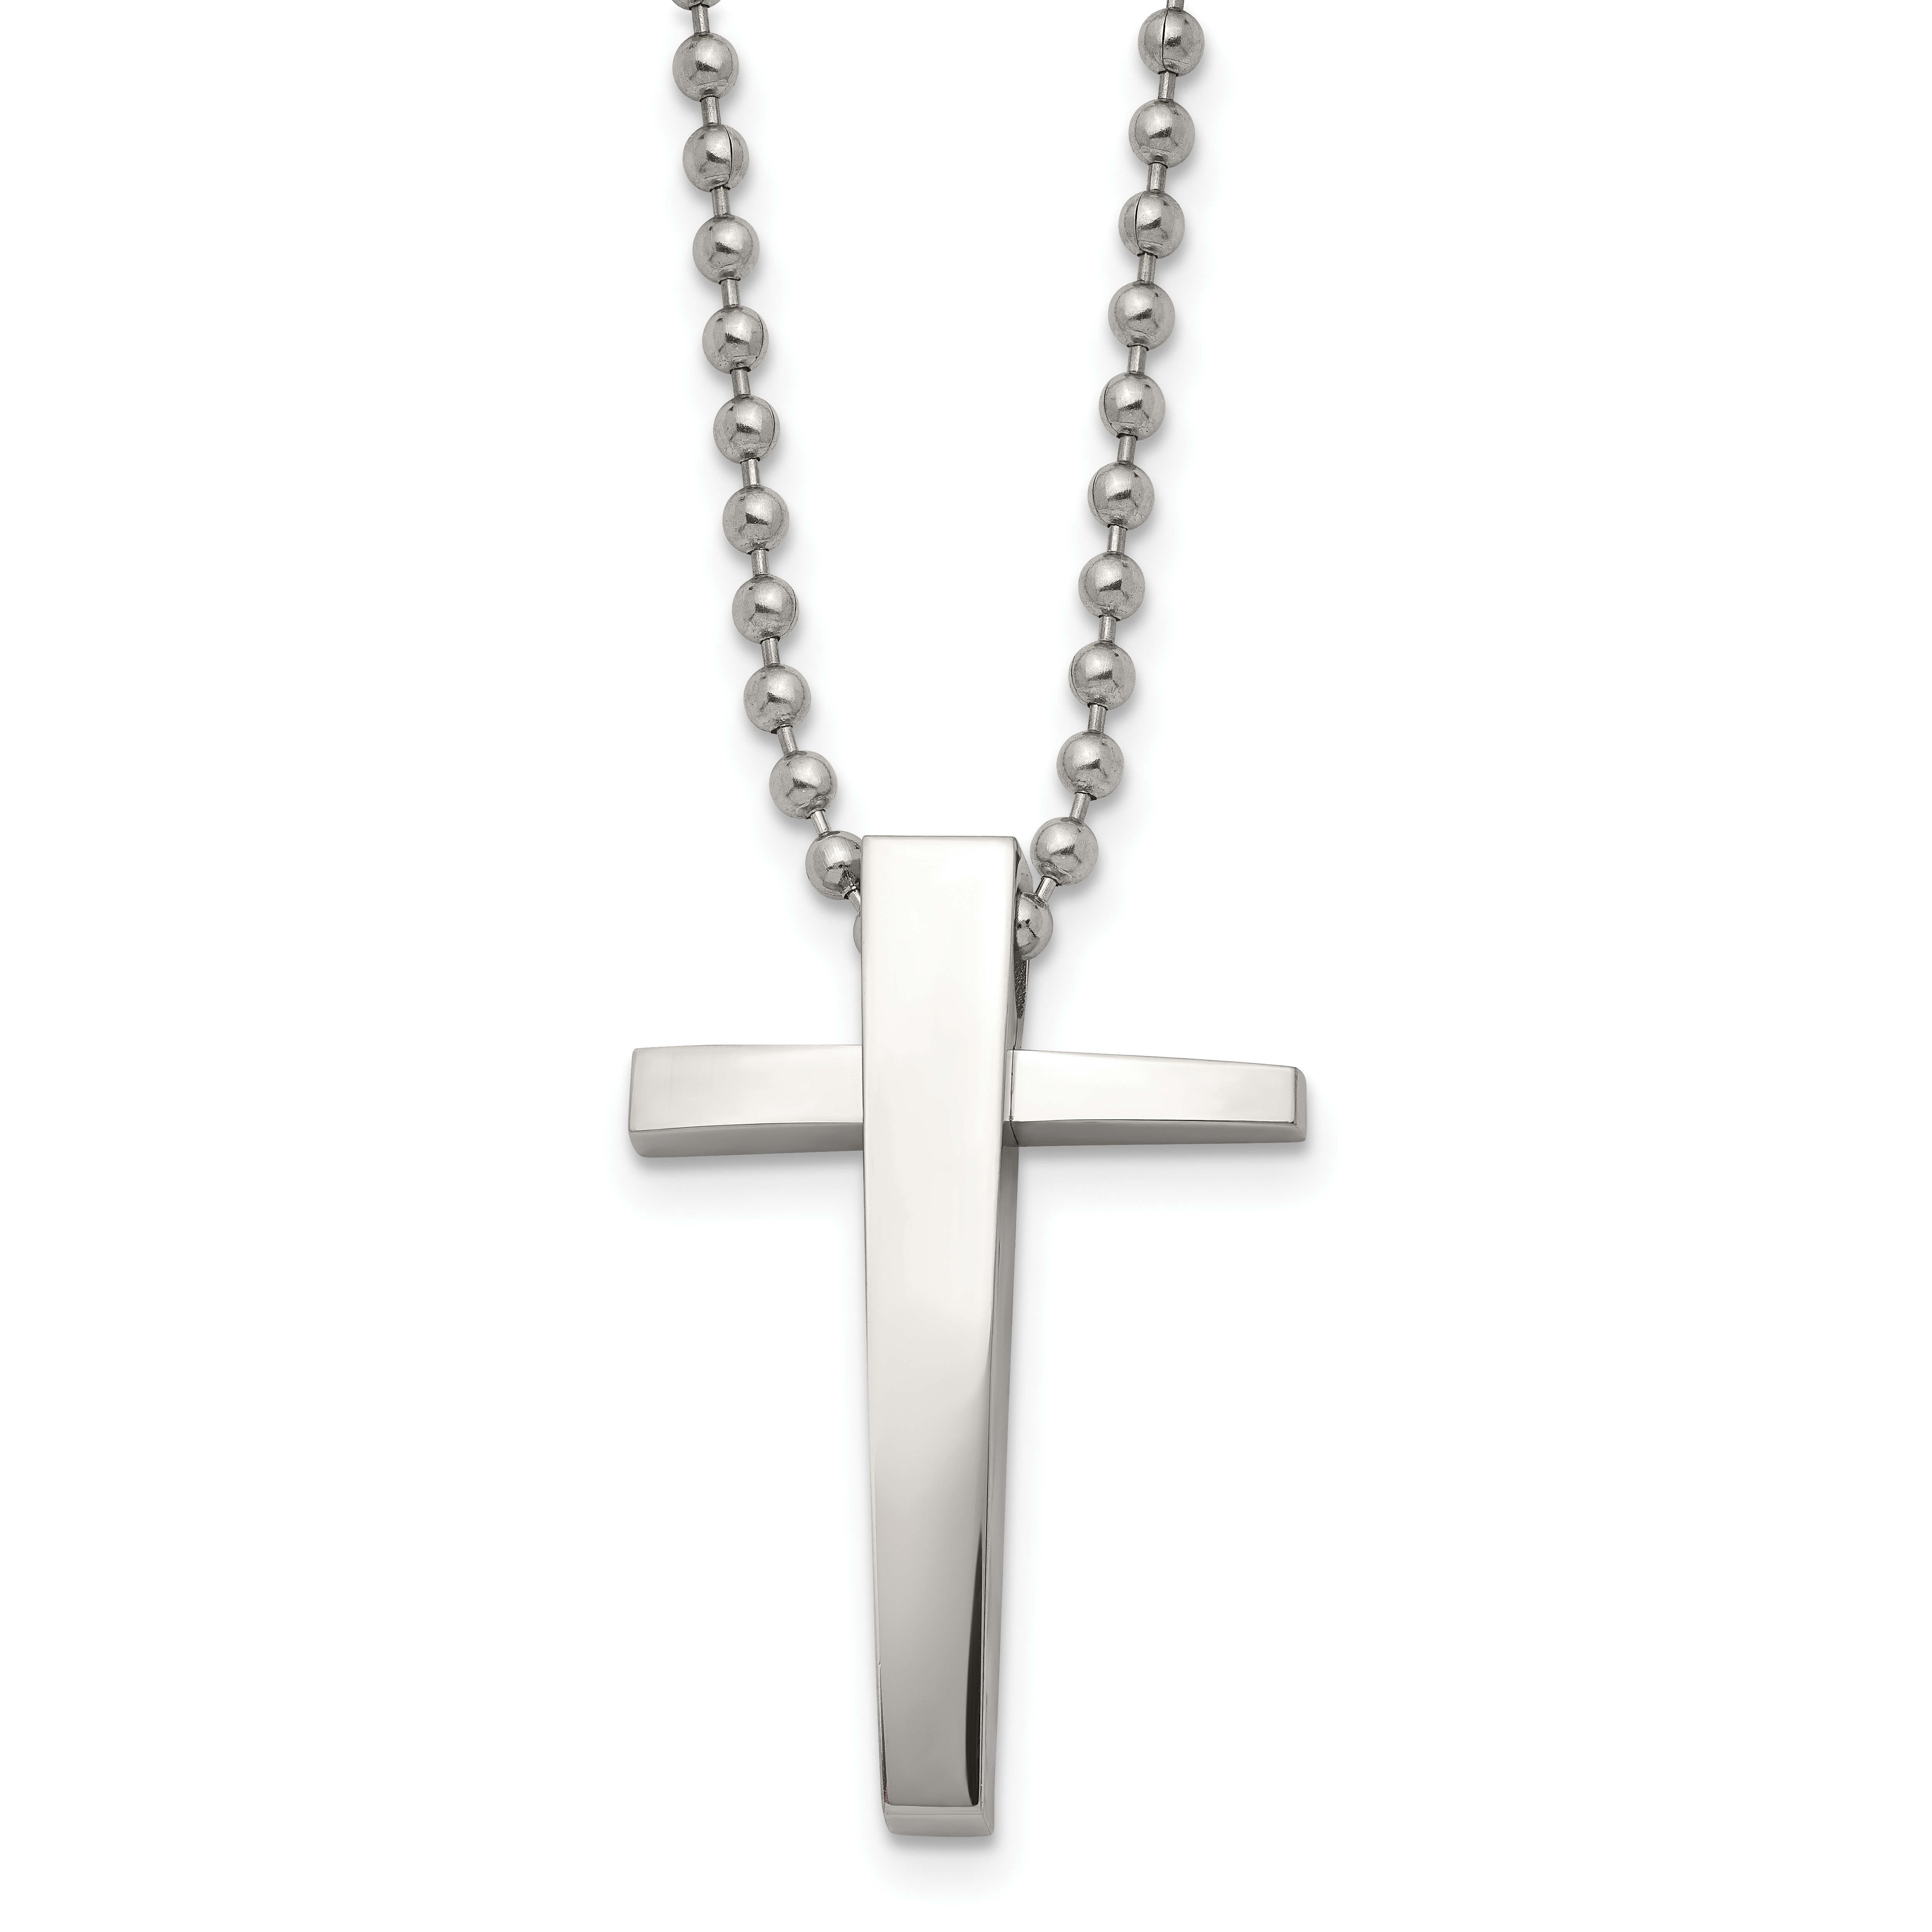 Mens Silver Cross Necklace Gold Fish Bone Pattern Cross, Stainless Steel  Crucifix Jesus Link Chain Catholic Jewelry Gift For Men From Nicewatchnice,  $12.36 | DHgate.Com